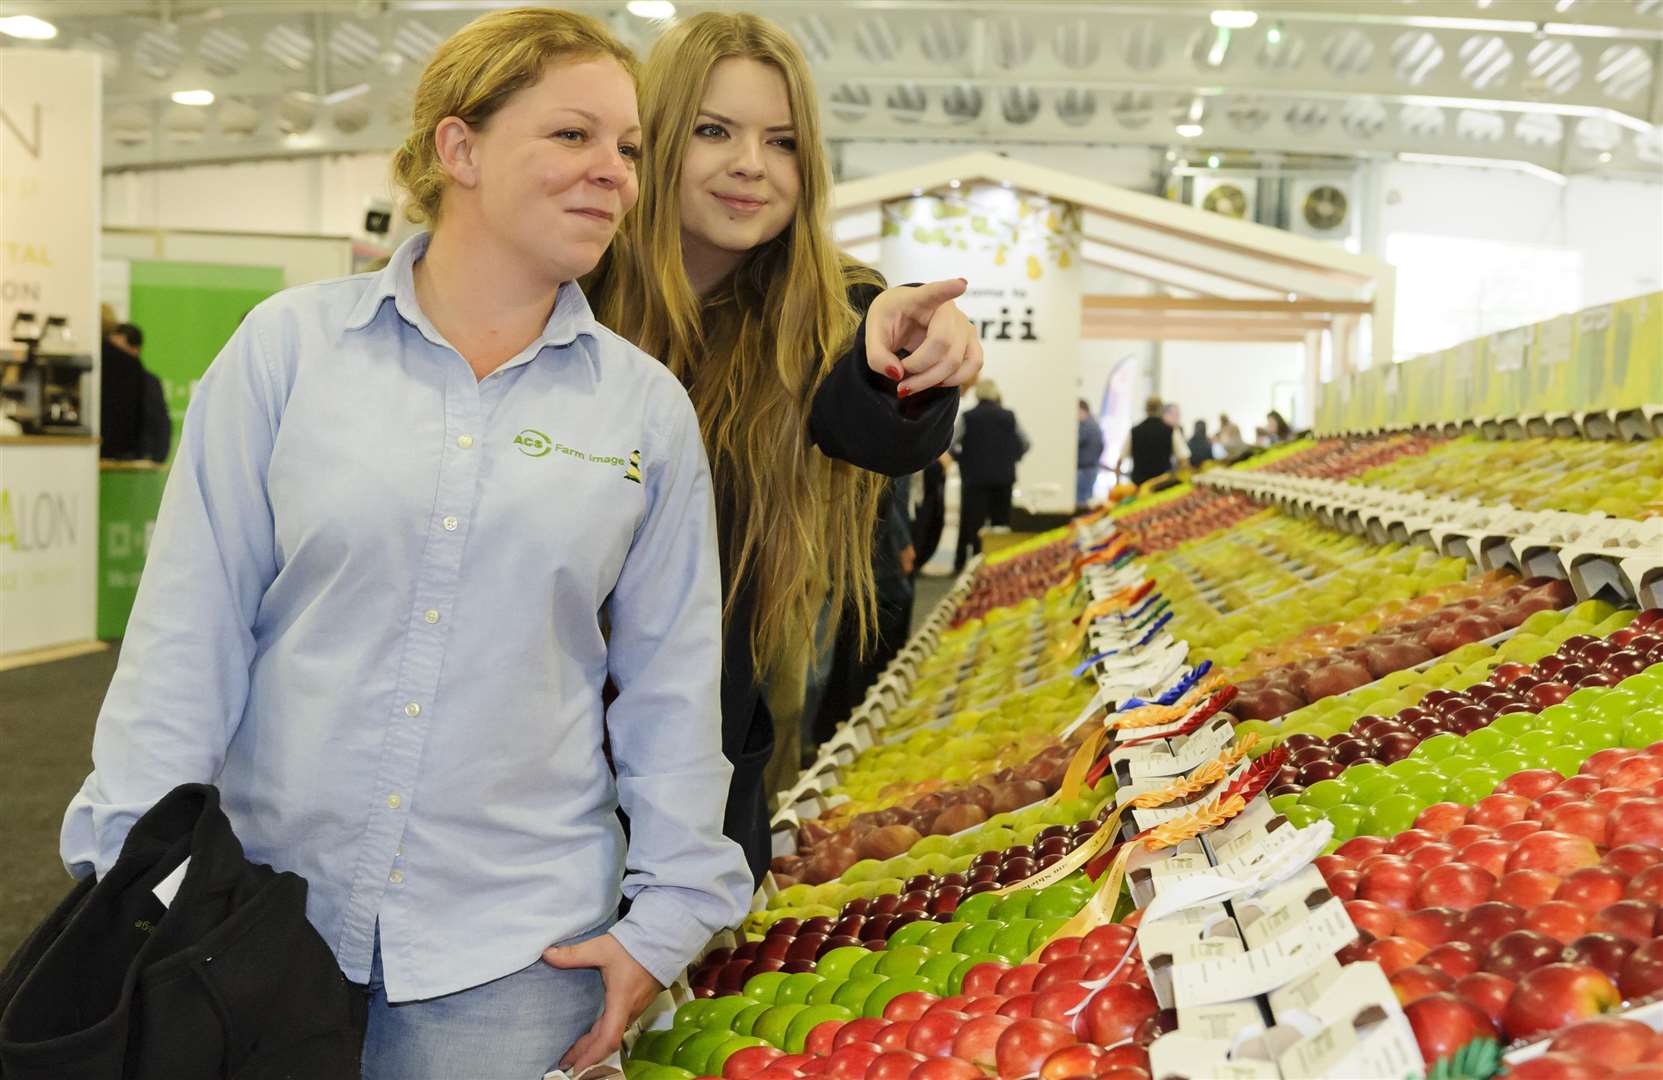 Eve Hart, and Amy Bradley of ACS Farm Image admire the long lines of competition entries at the National Fruit Show